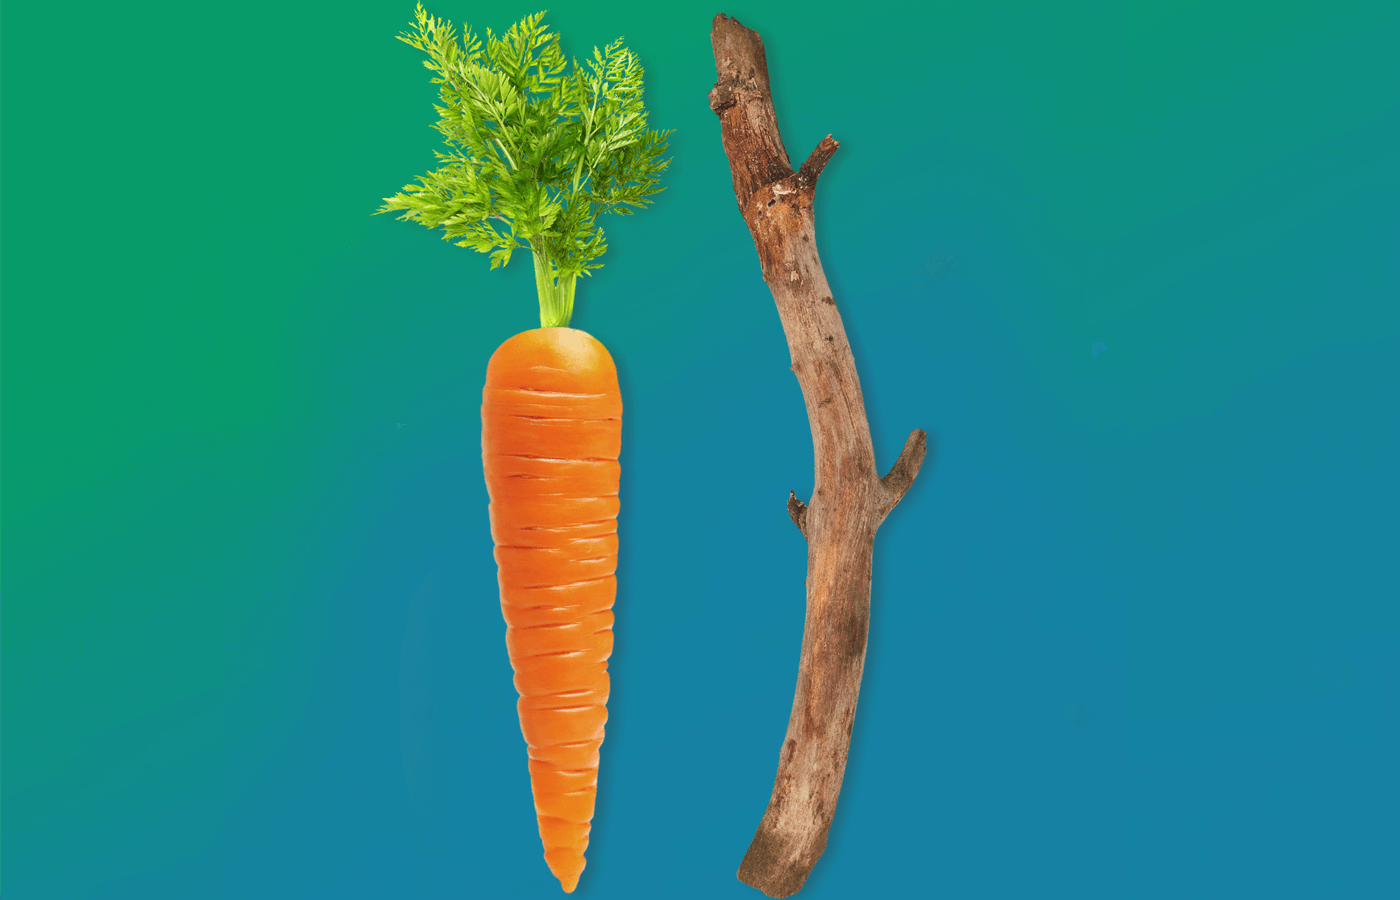 Illustration of a carrot and a stick